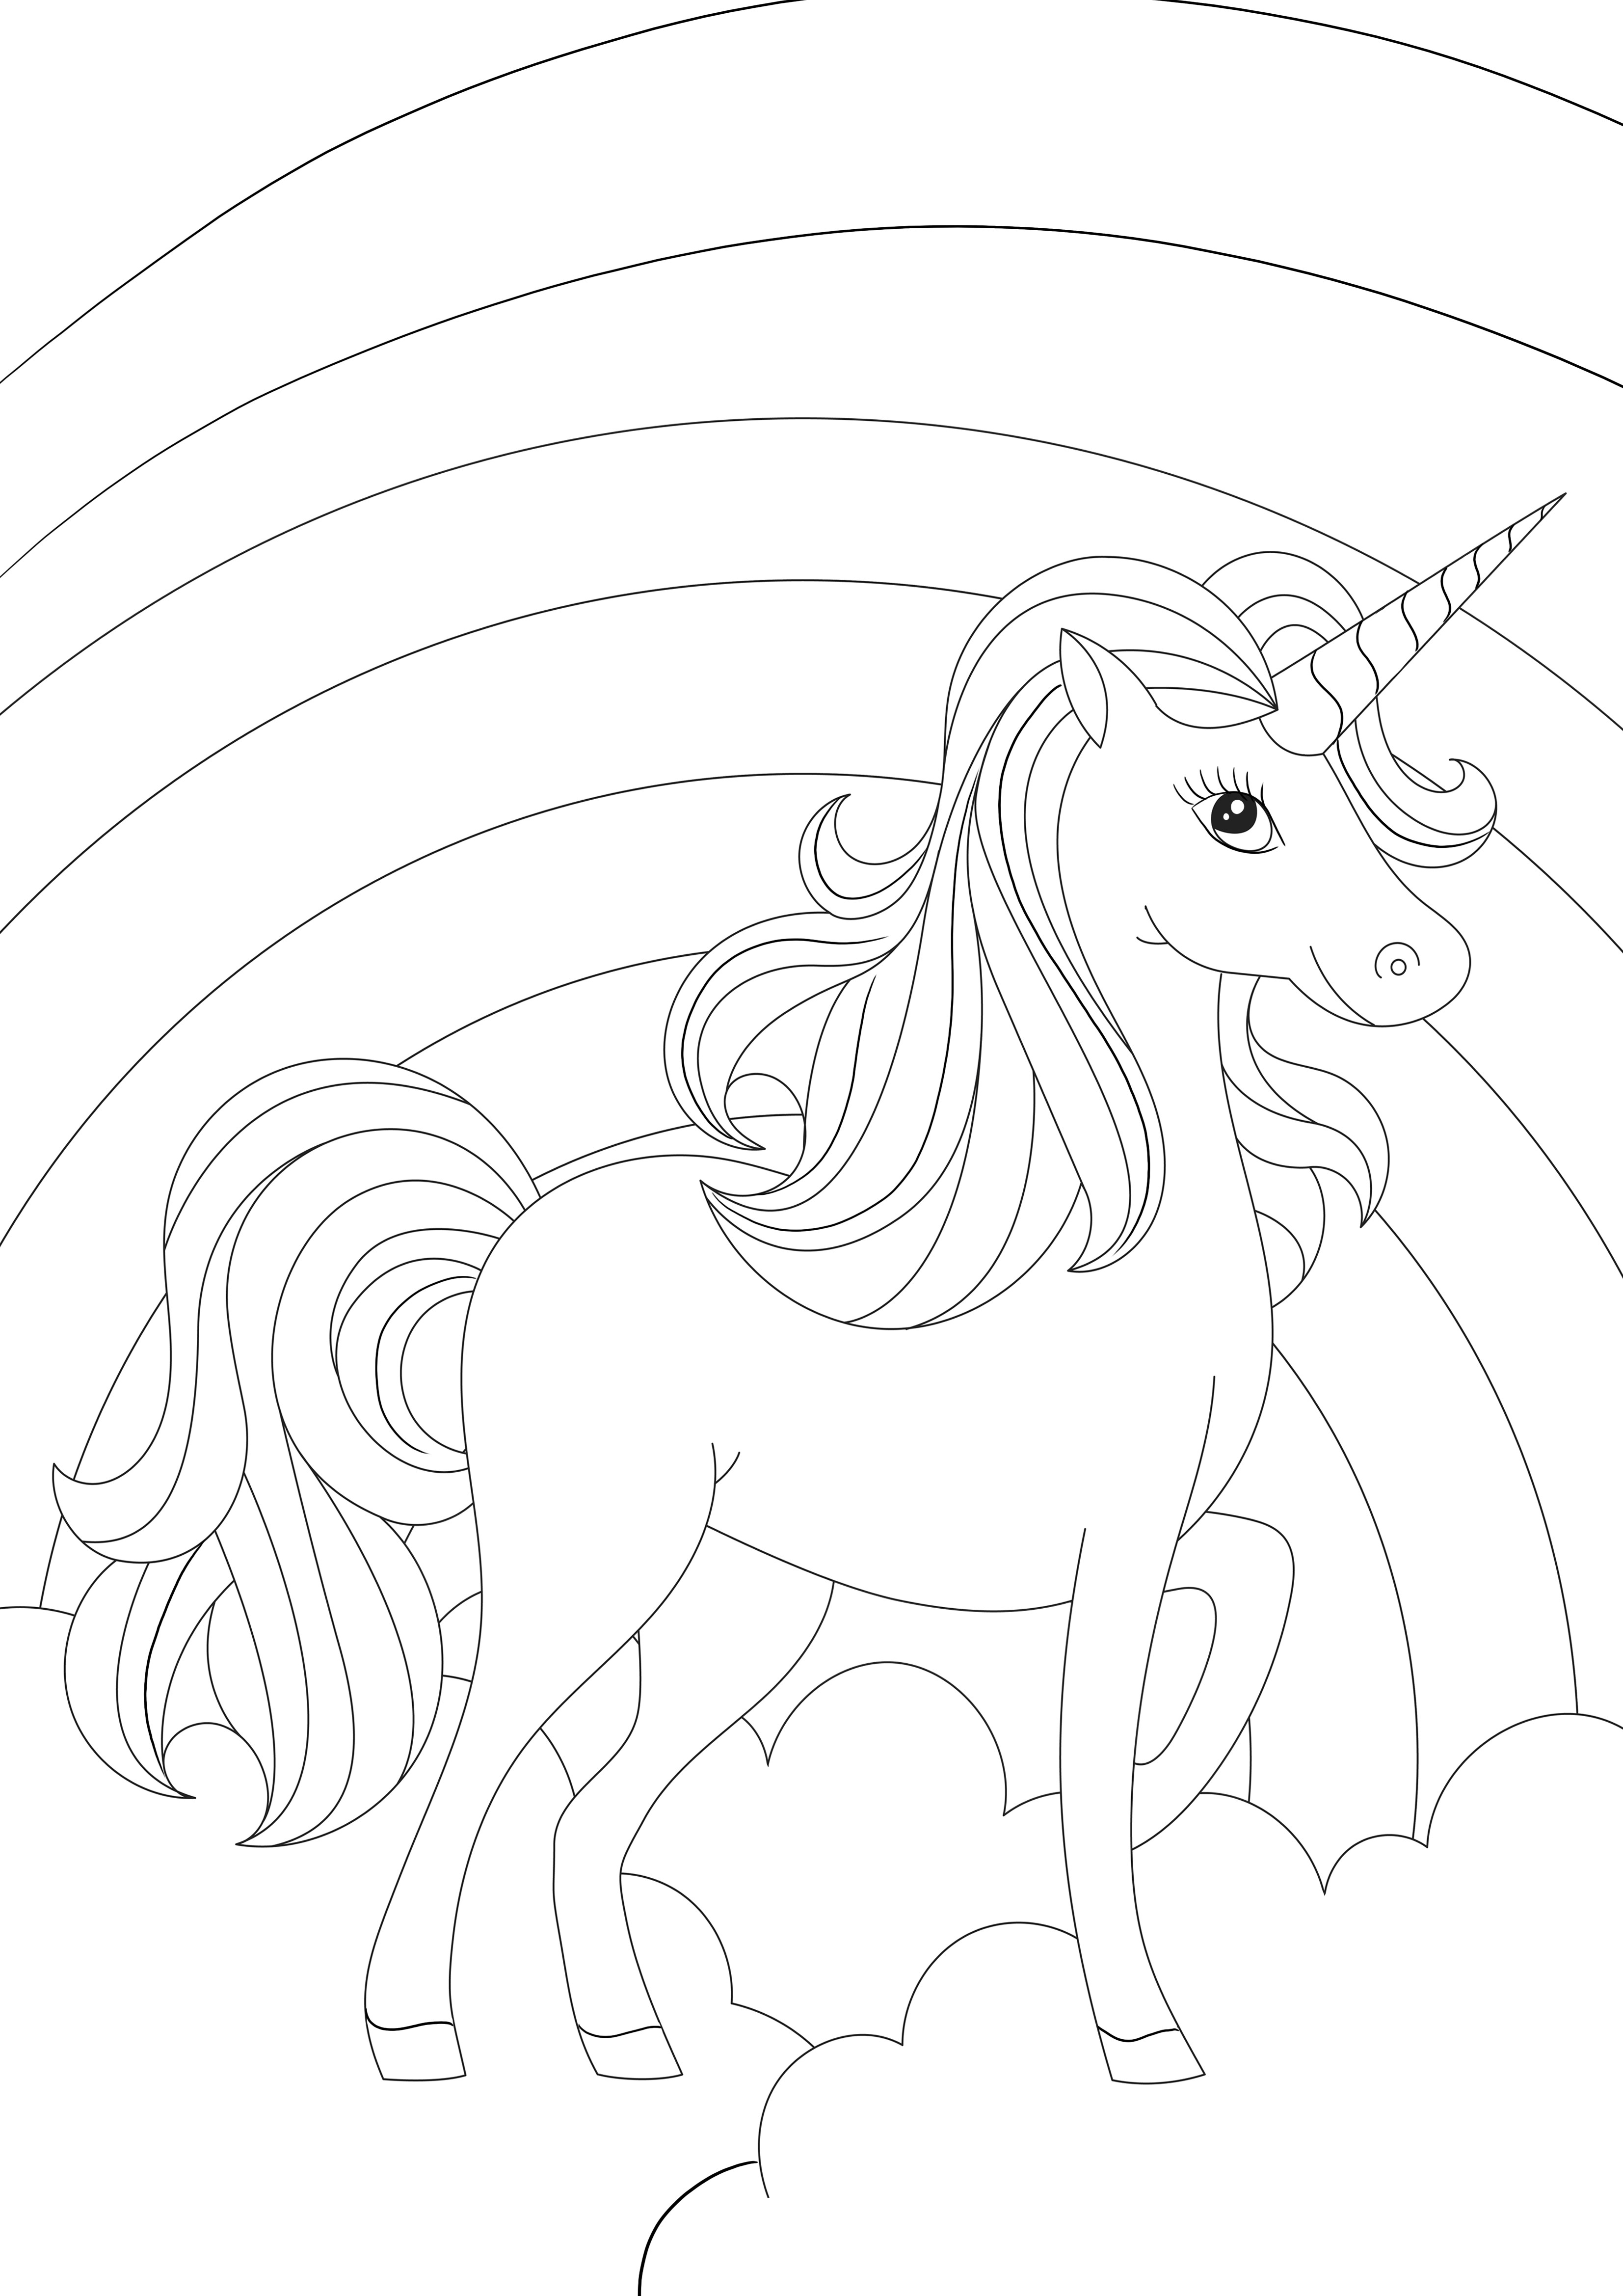 Simple coloring page of rainbow and unicorn free to print